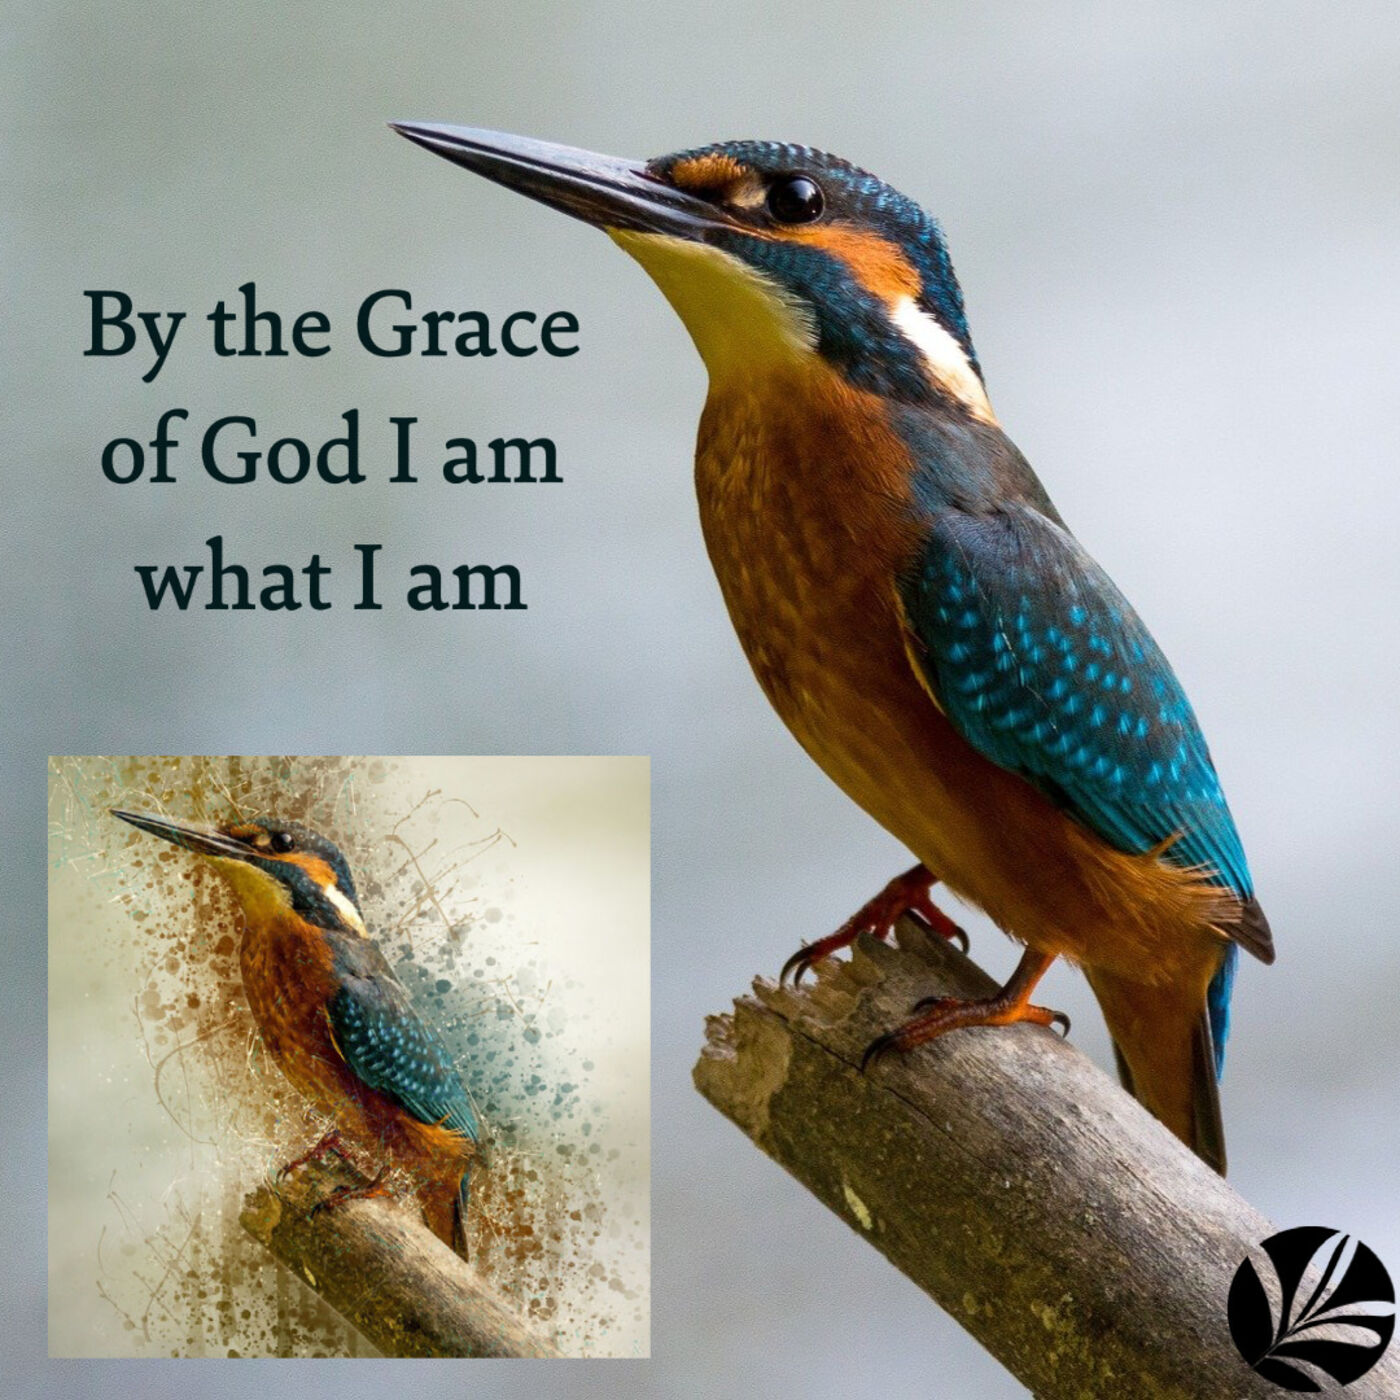 By the Grace of God I am What I am